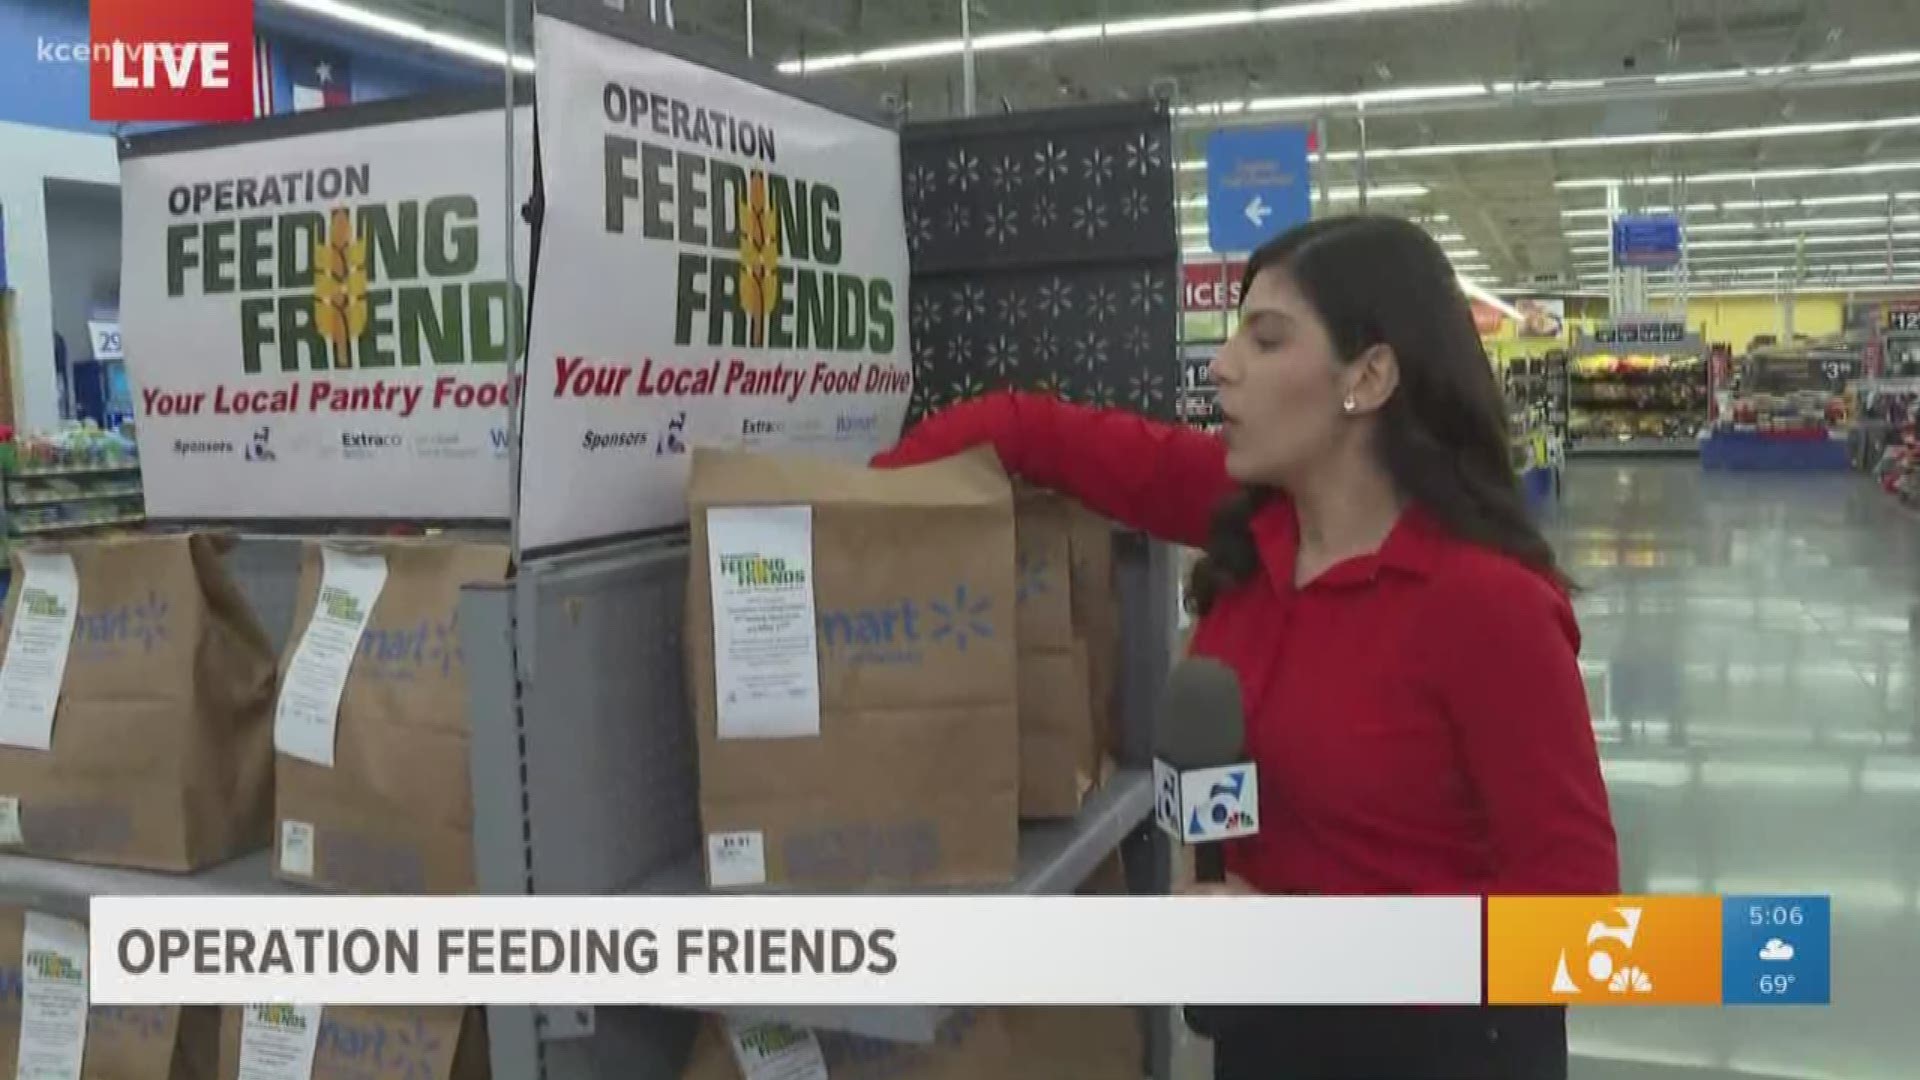 KCEN Channel 6, Extraco Banks and Operation Feeding Temple is teaming up to stock local pantries through the second annual Operation Feeding Friends food drive! On Friday, May 17 from 6 a.m. to 8 p.m., volunteers will collect non-perishable food items and money at Walmart stores and Extraco banks in Bell County.